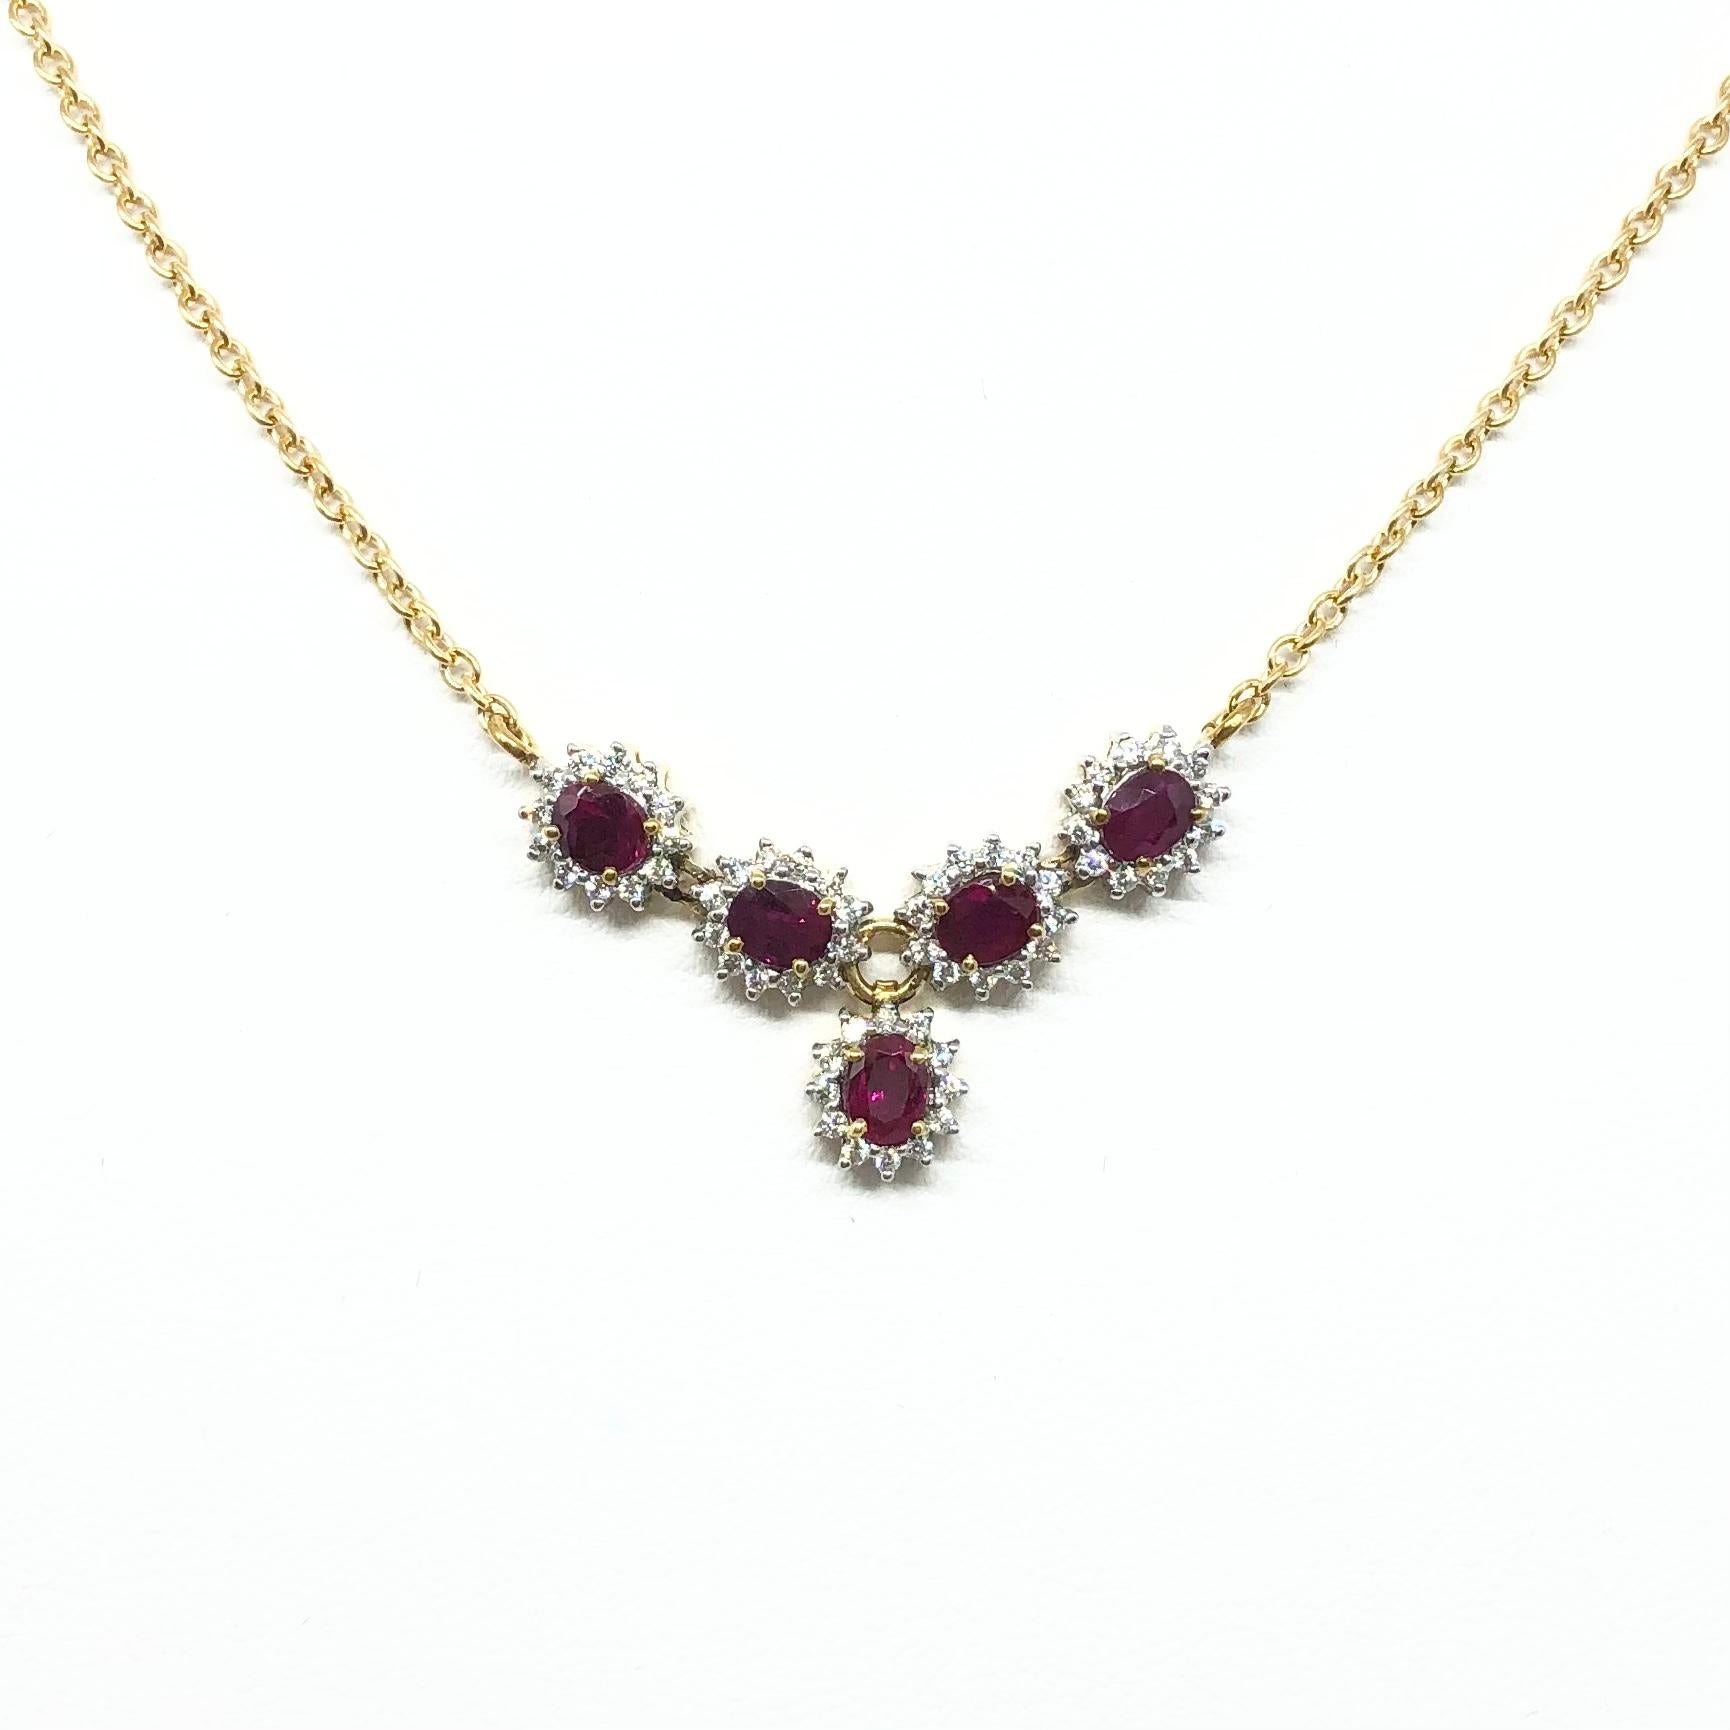 Ruby 1.74 carats with Diamond 0.40 carat Necklace set in 18 Karat Gold Settings

Width: 1.2 cm 
Length: 44.0 cm
Total Weight: 8.09 grams

